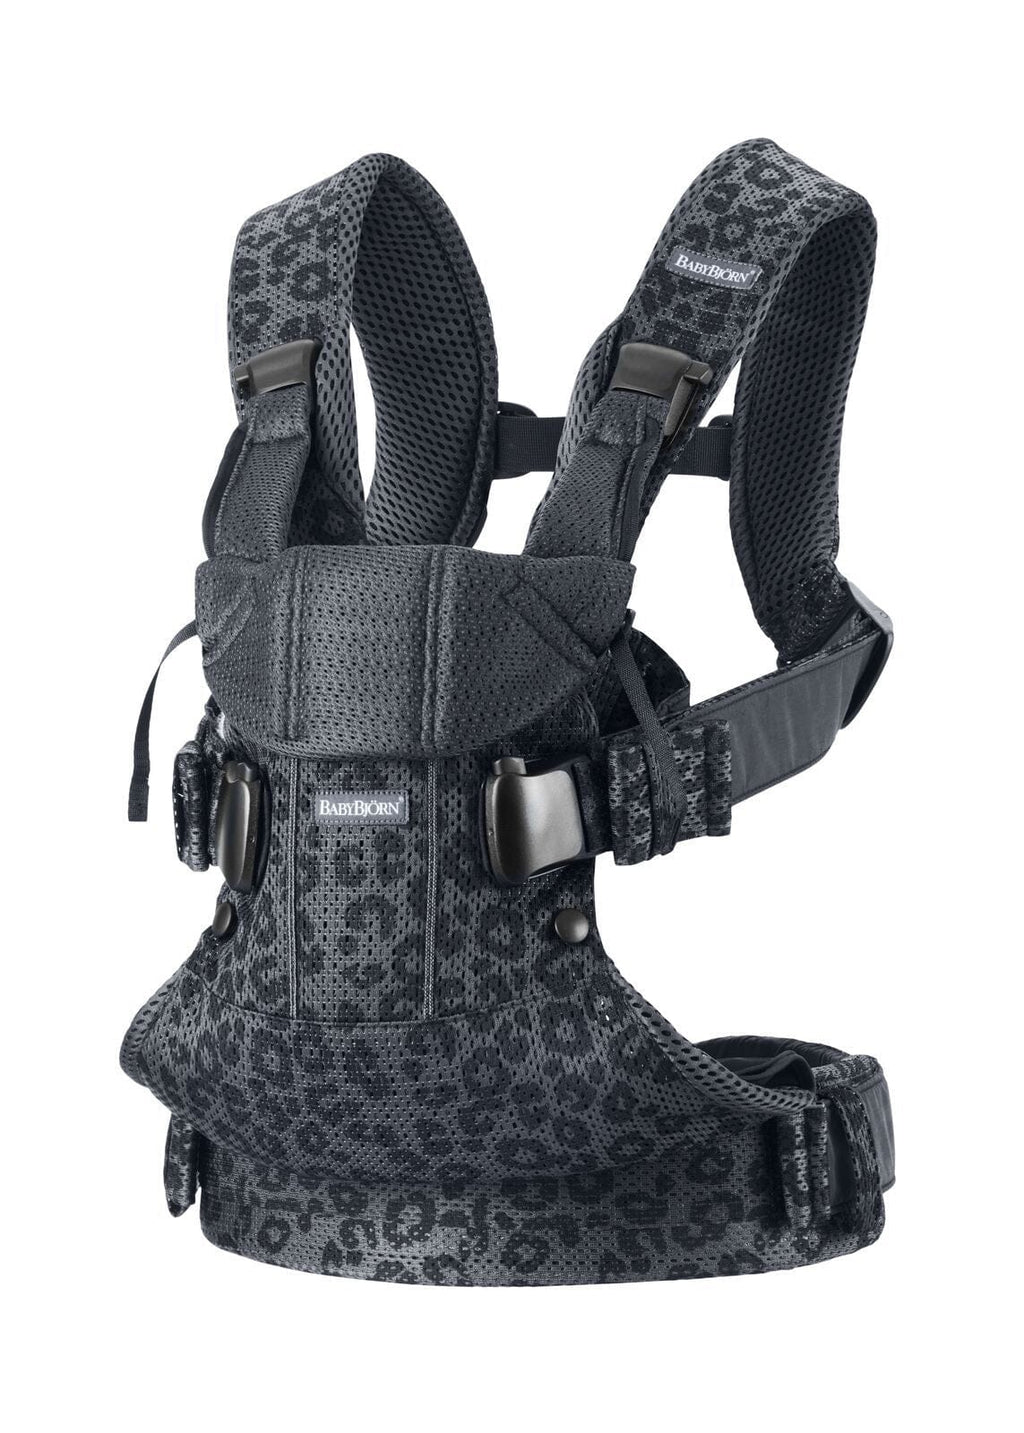 Baby Carrier One Air in flexible, airy mesh